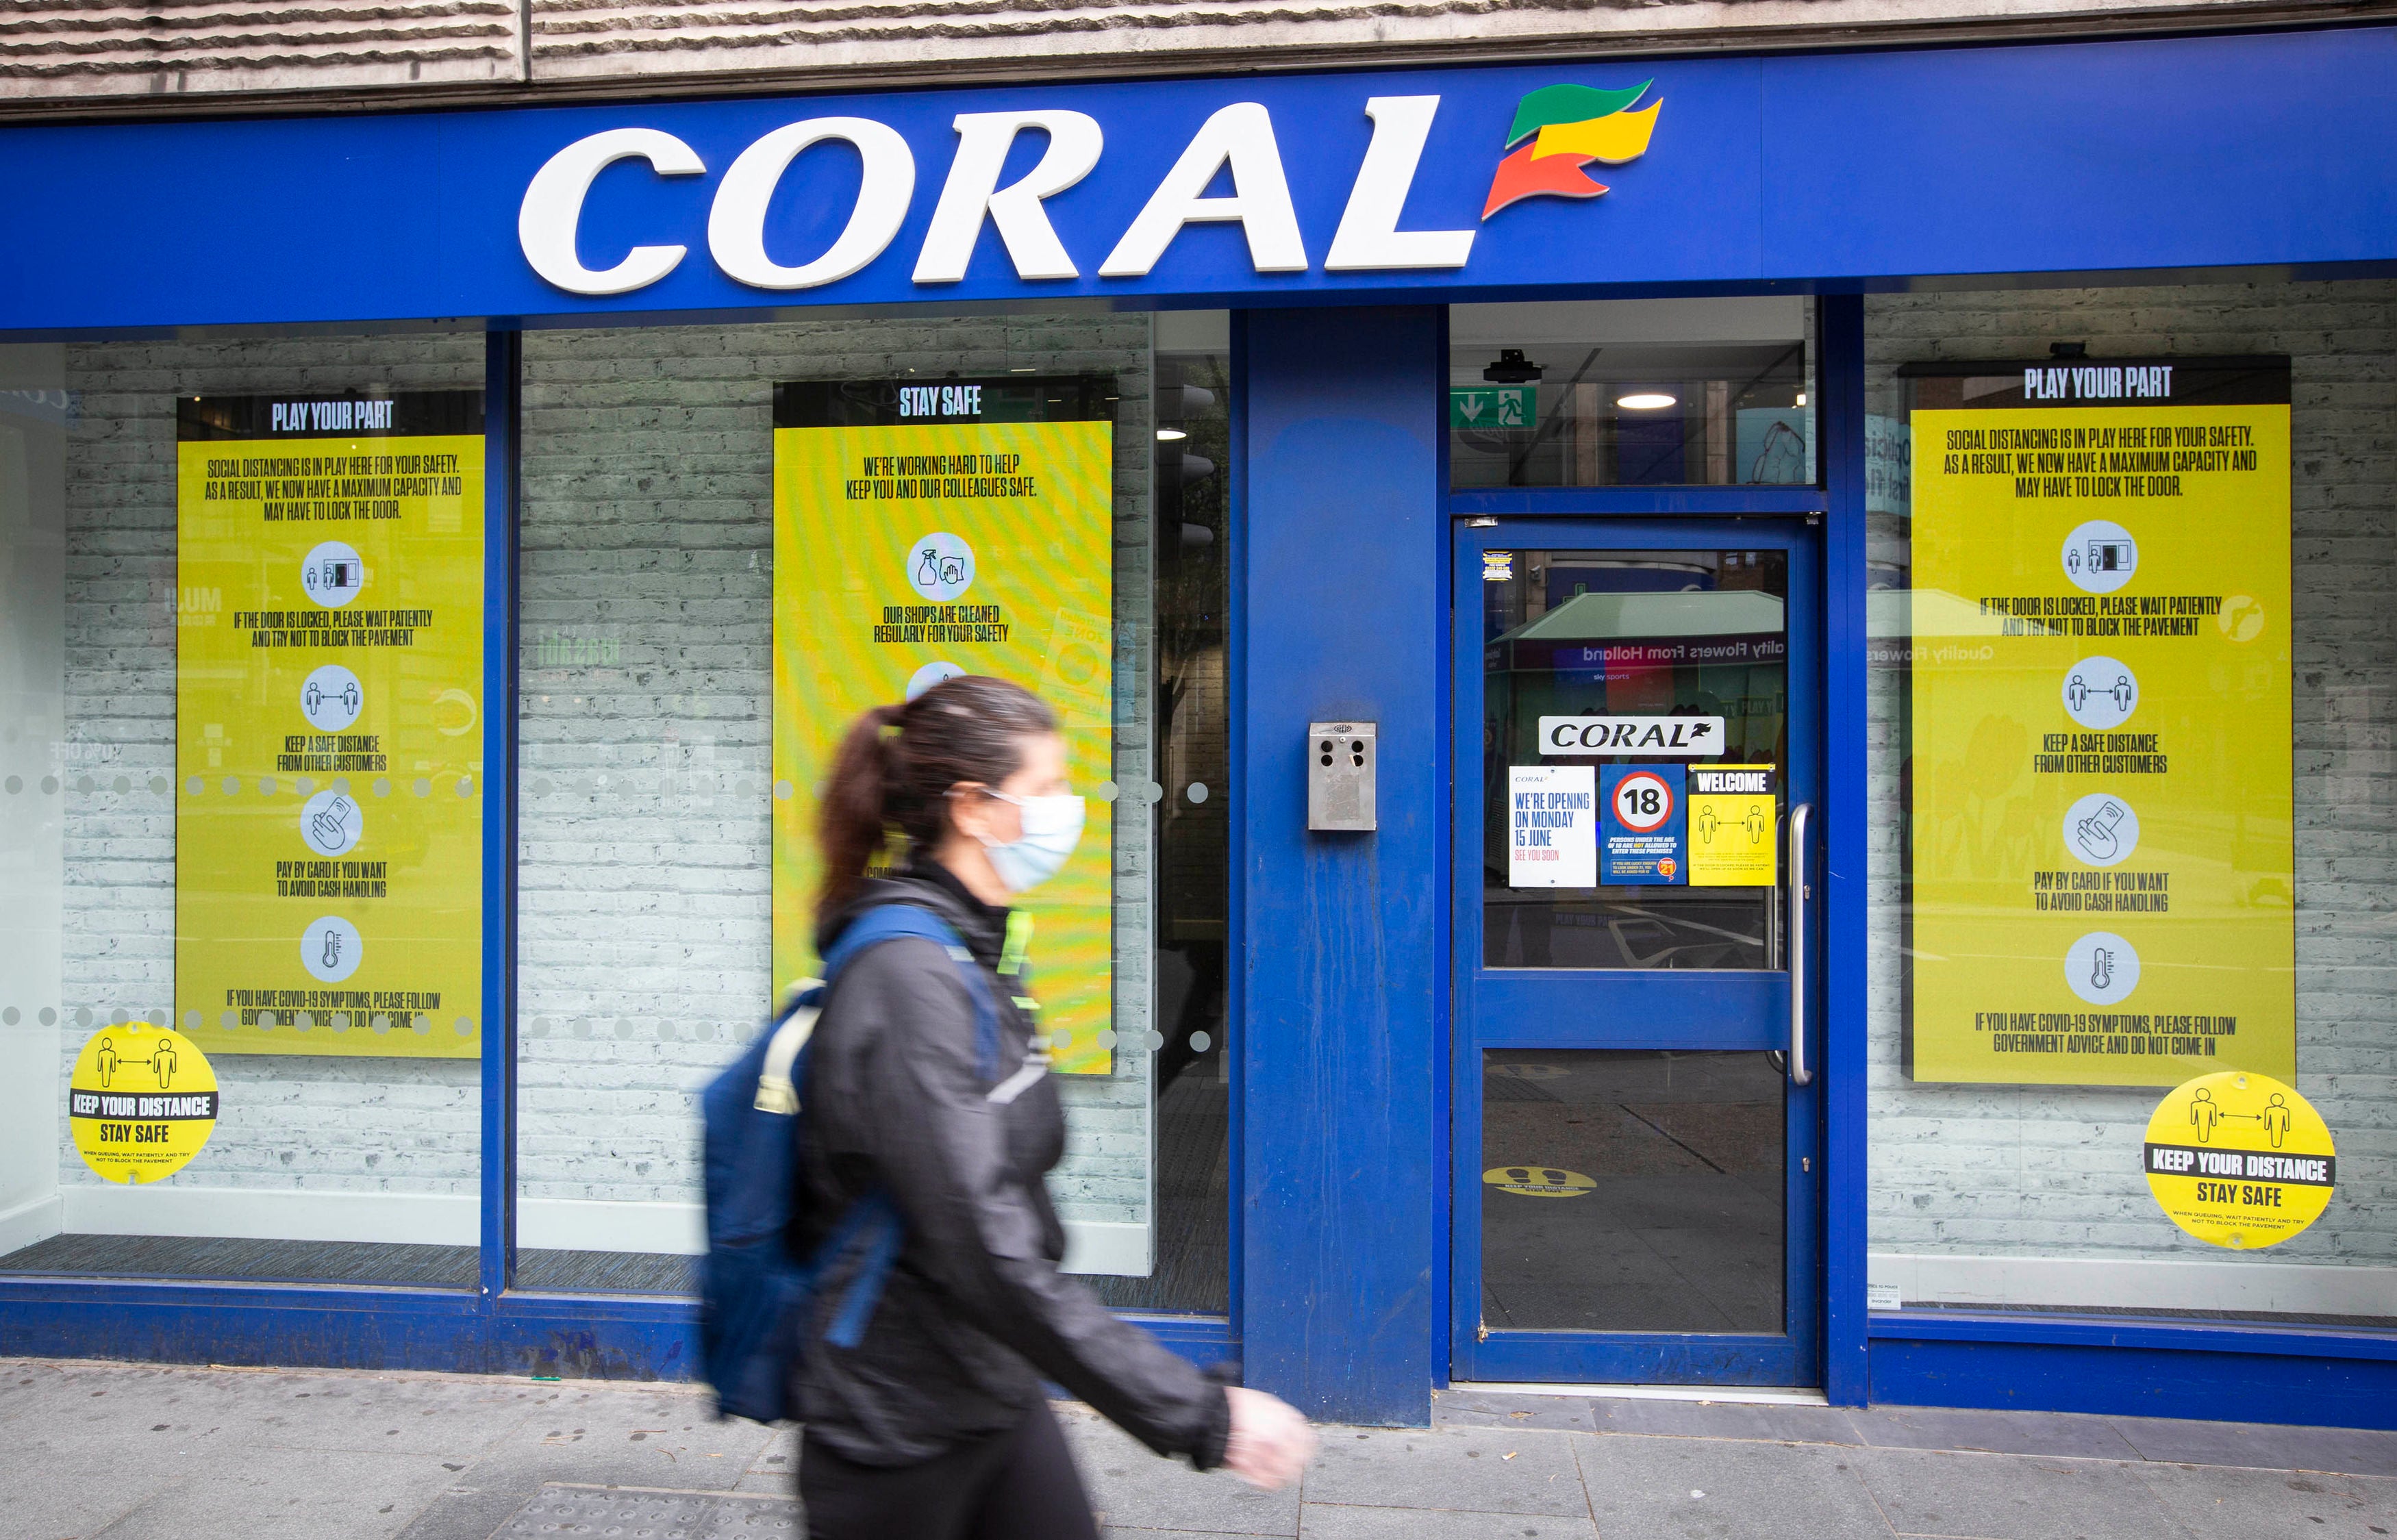 Coral and Ladbroke owner Entain is expected to show a slowdown in online gambling after pandemic restrictions eased (Matt Alexander/PA)